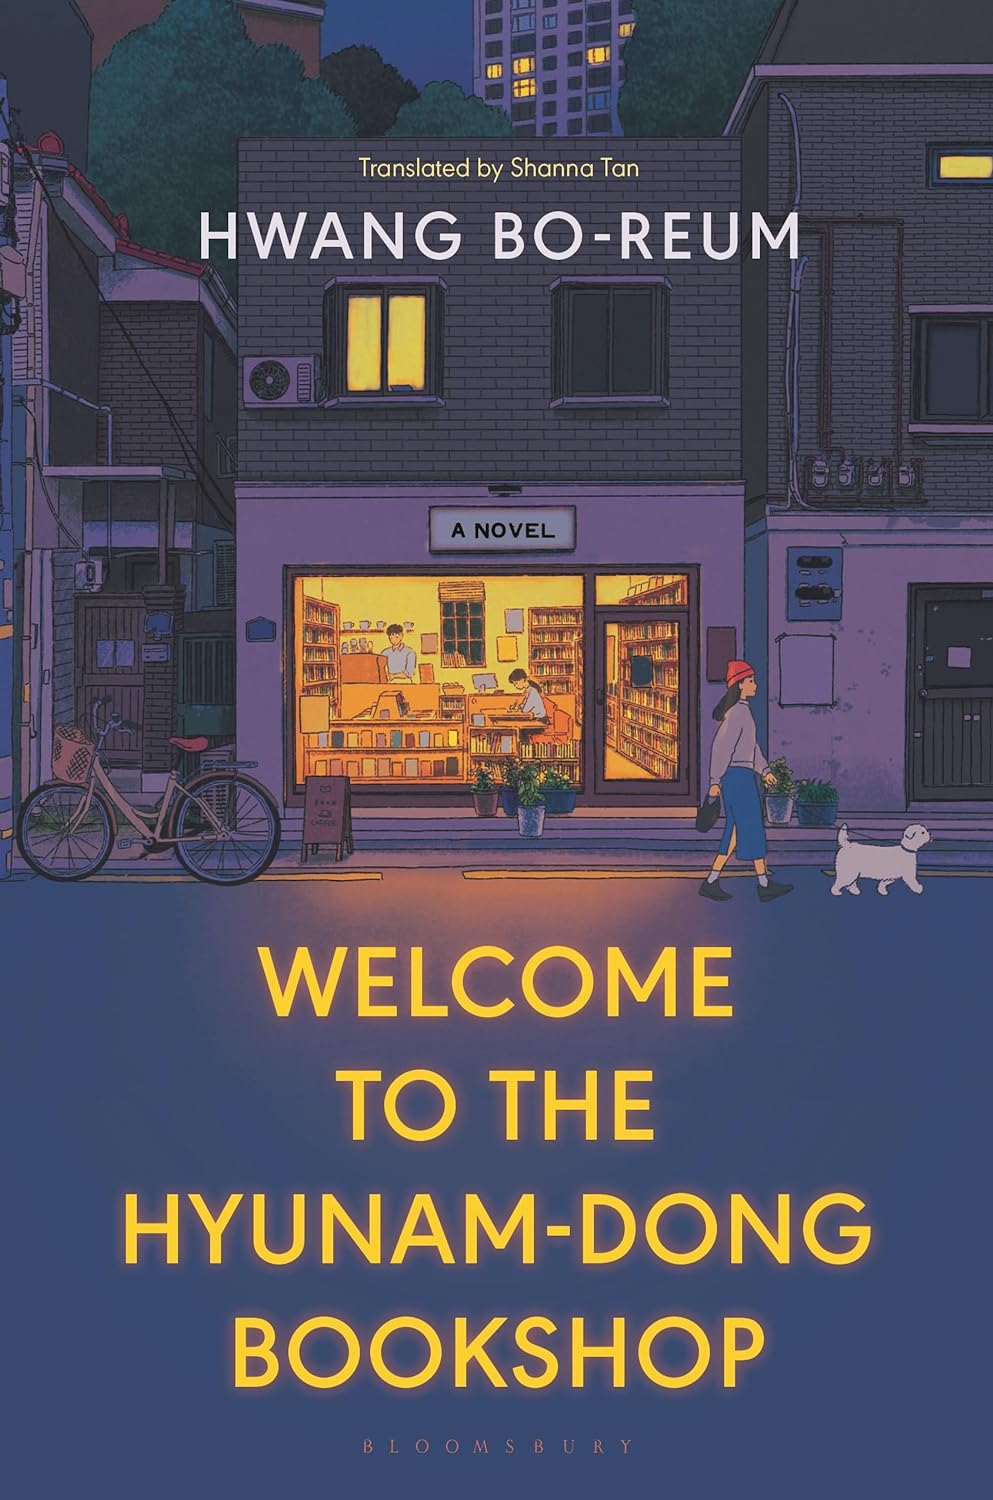 Welcome to the Hyunam-Dong Bookshop -Hwang Bo-reum - The Society for Unusual Books